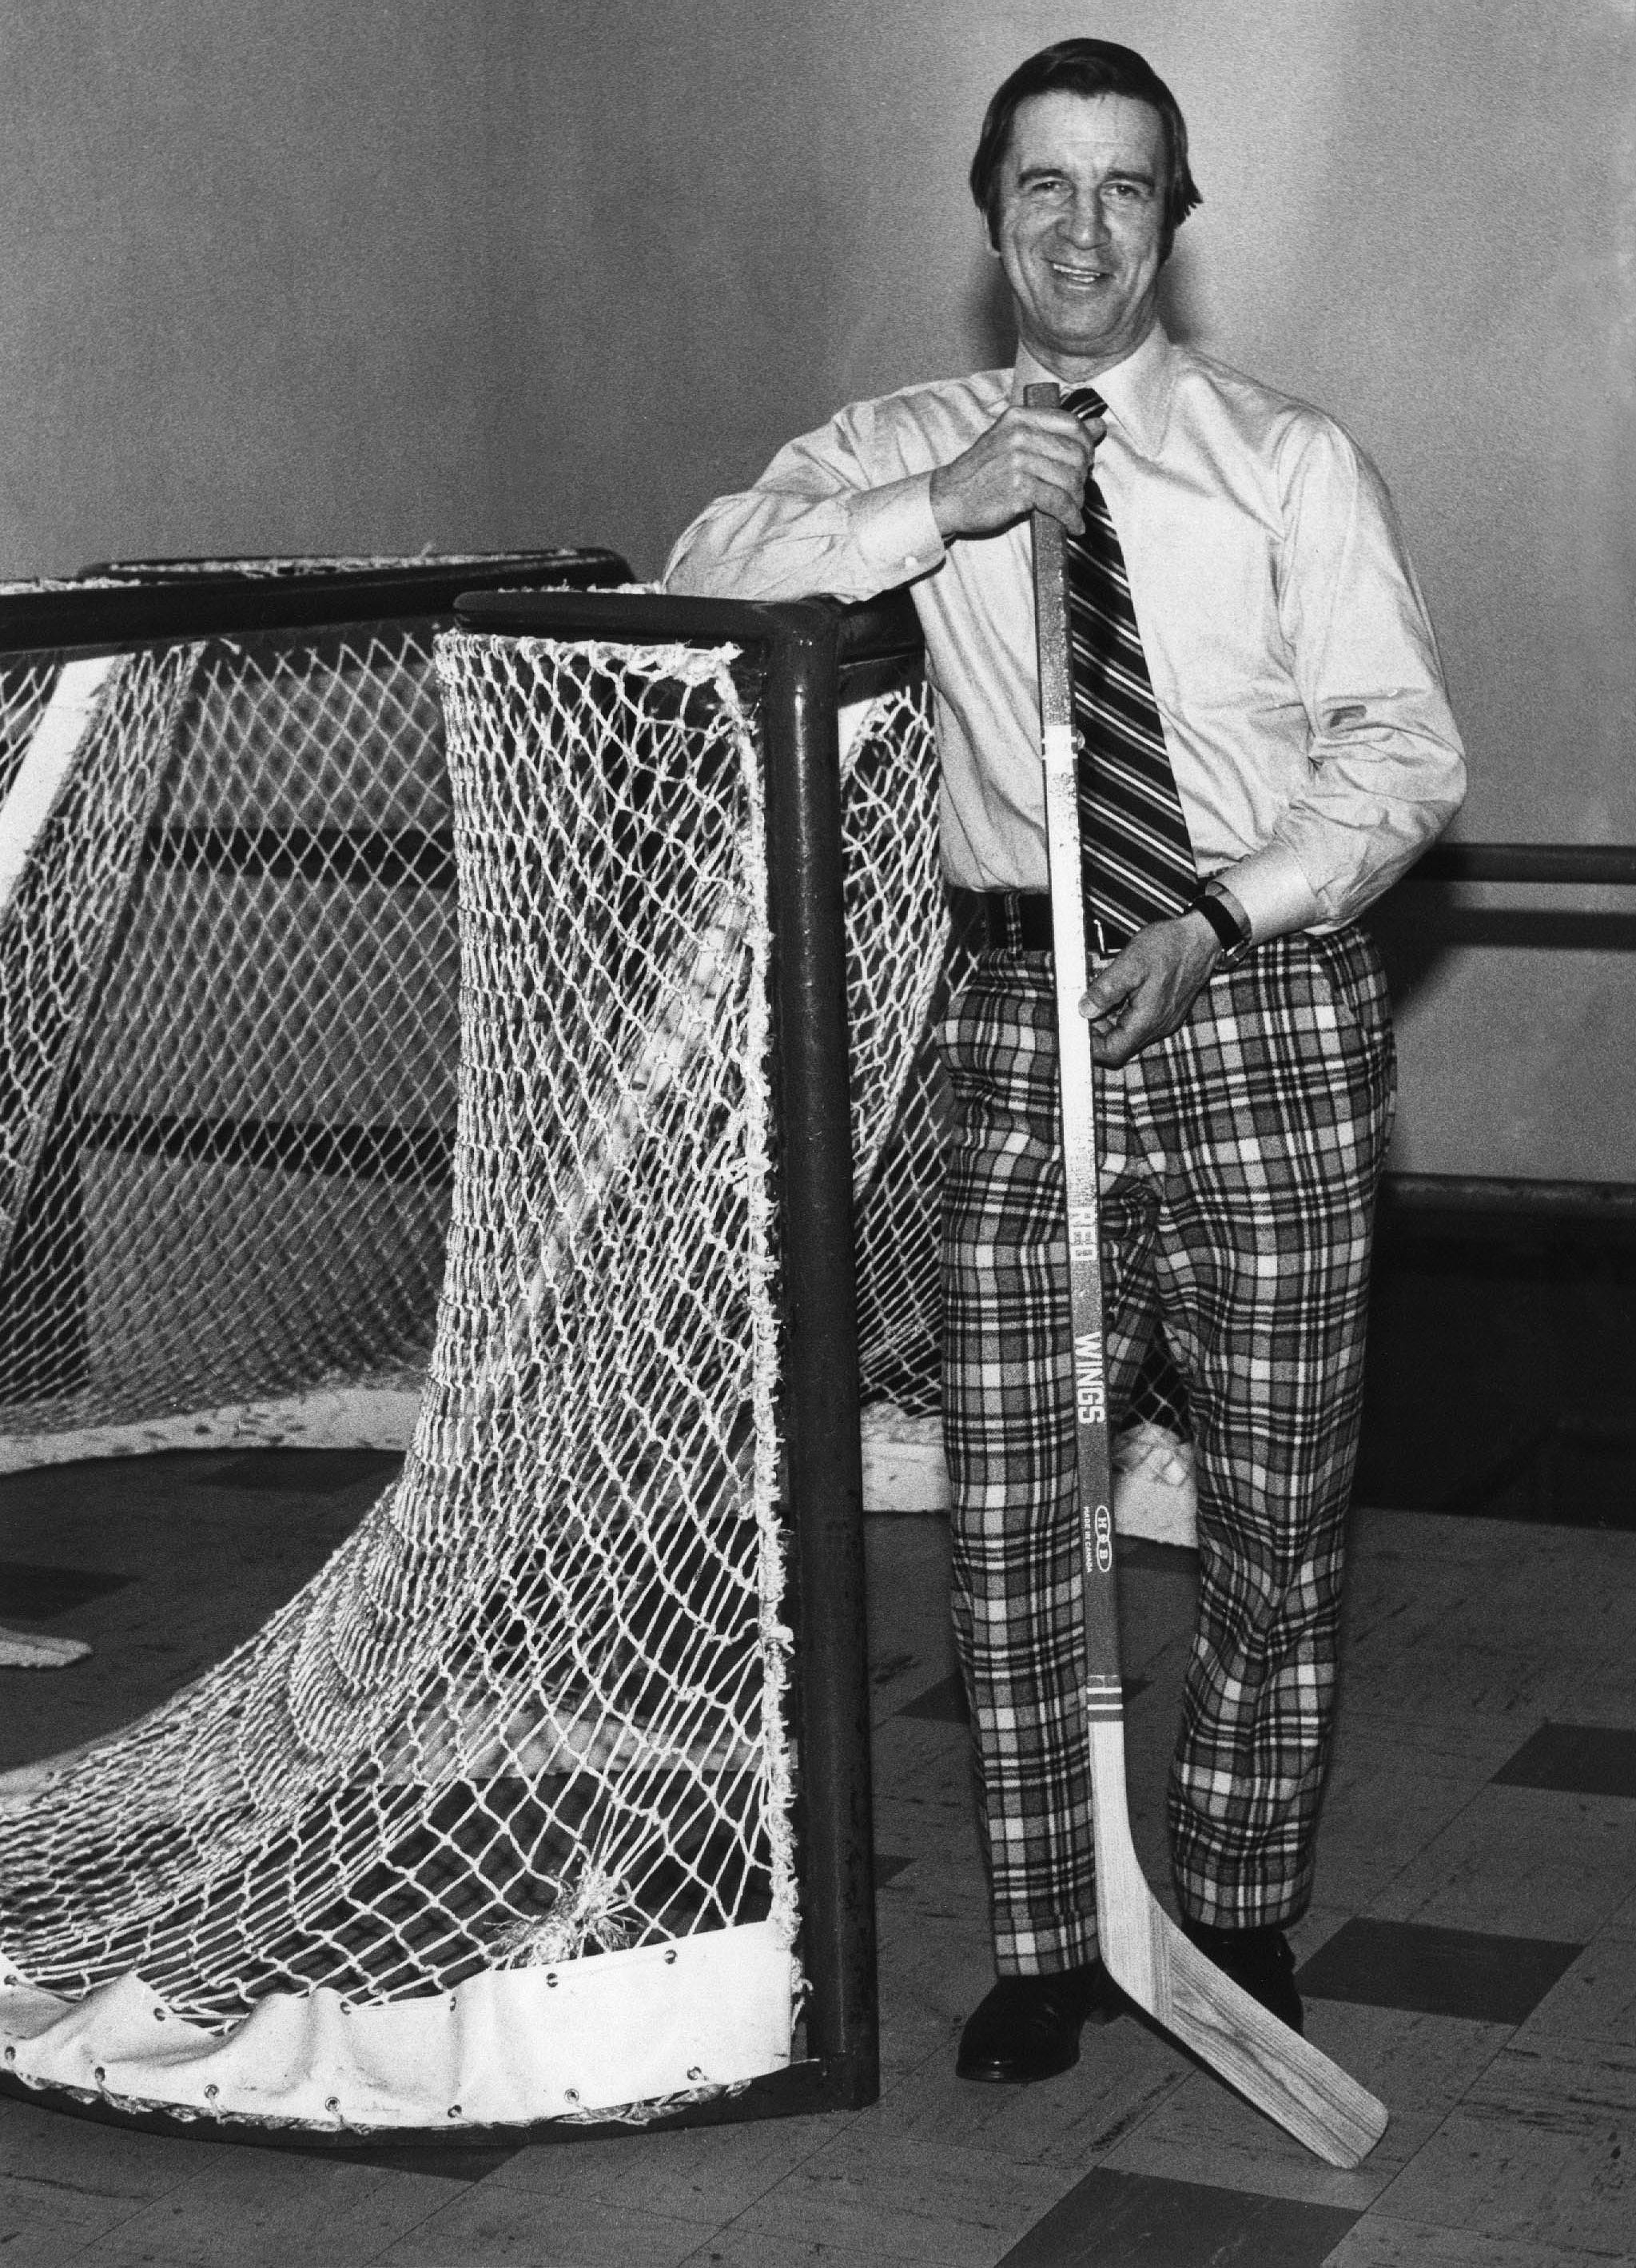 Ted Lindsay, now general manager of the Detroit Red Wings, wears pants he would someday likely regret in March 1977 at Olympia Stadium.